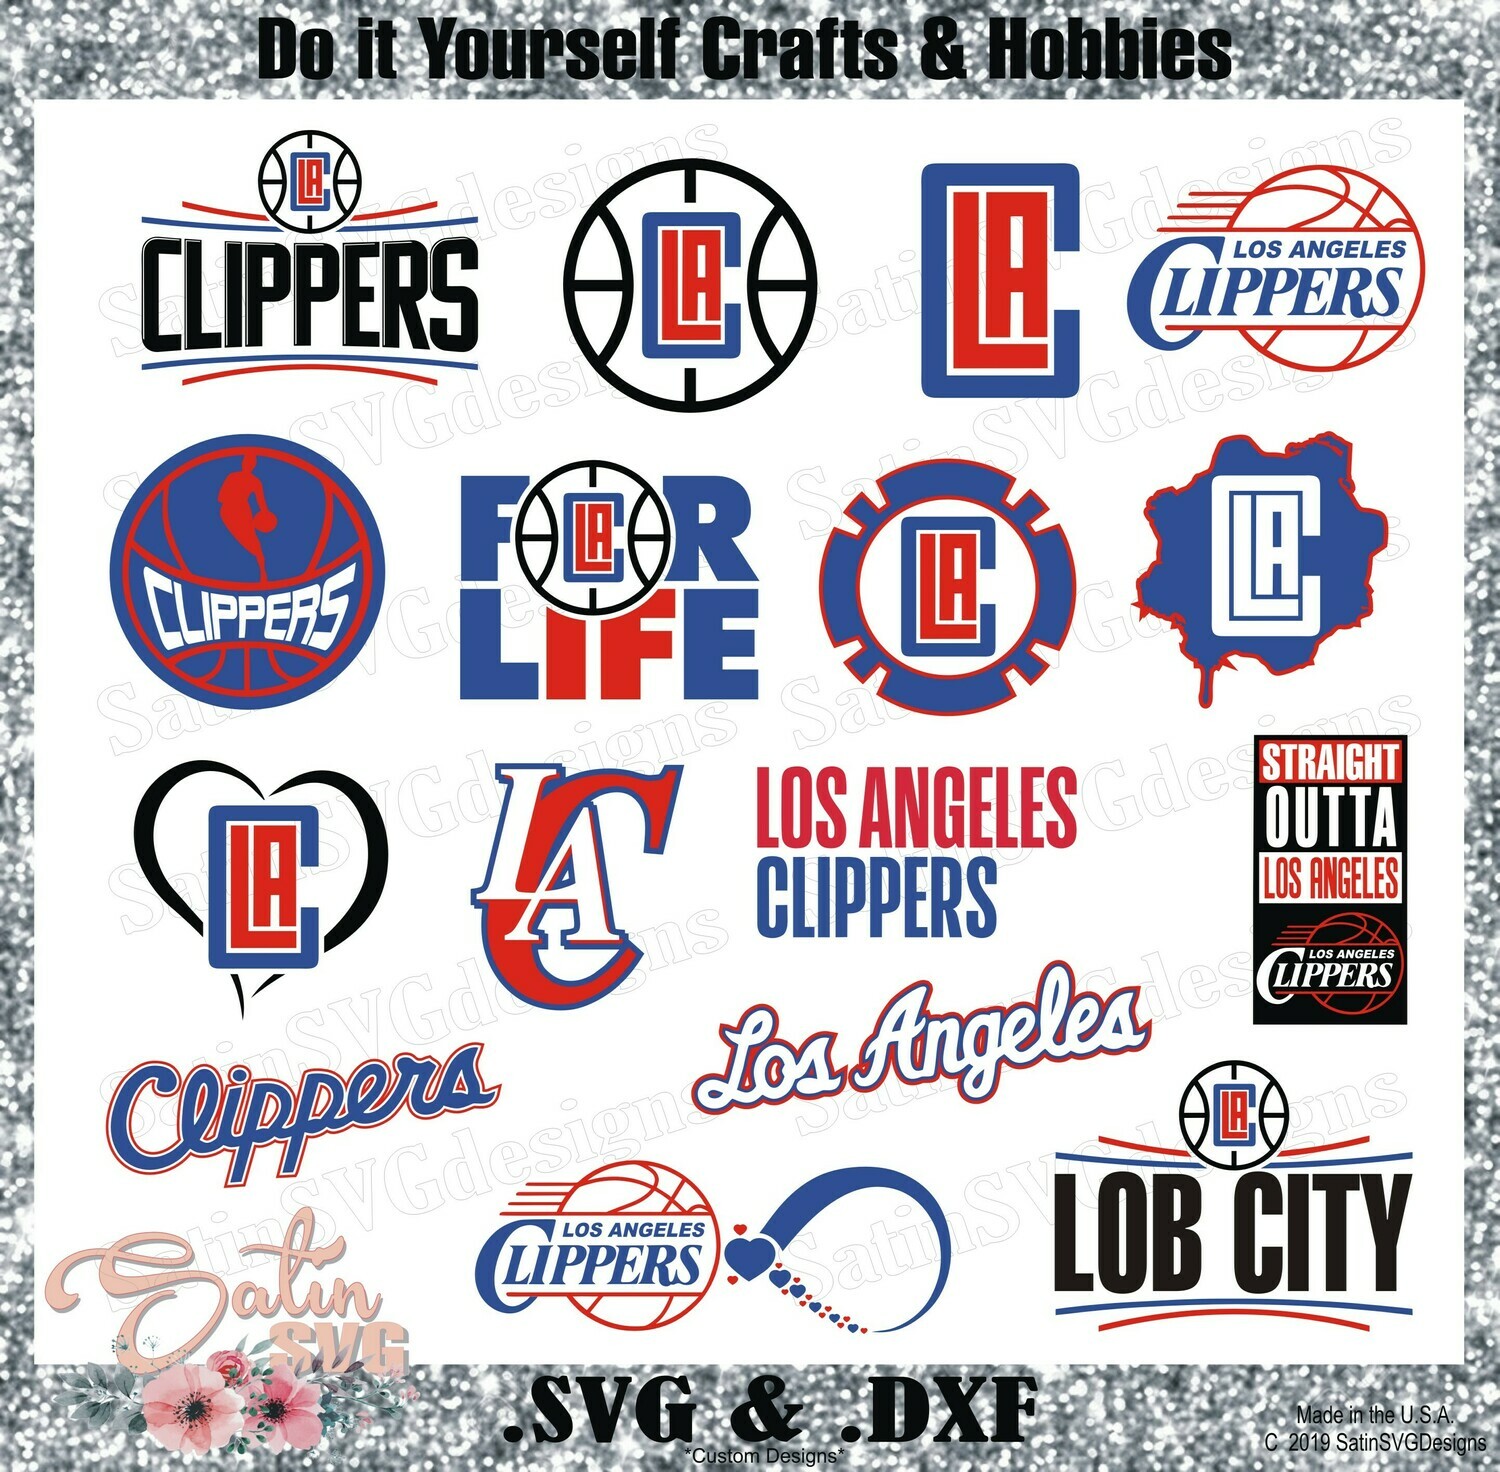 Los Angeles Clippers NEW Custom NBA Designs. SVG Files, Cricut, Silhouette Studio, Digital Cut Files, Infusible Ink